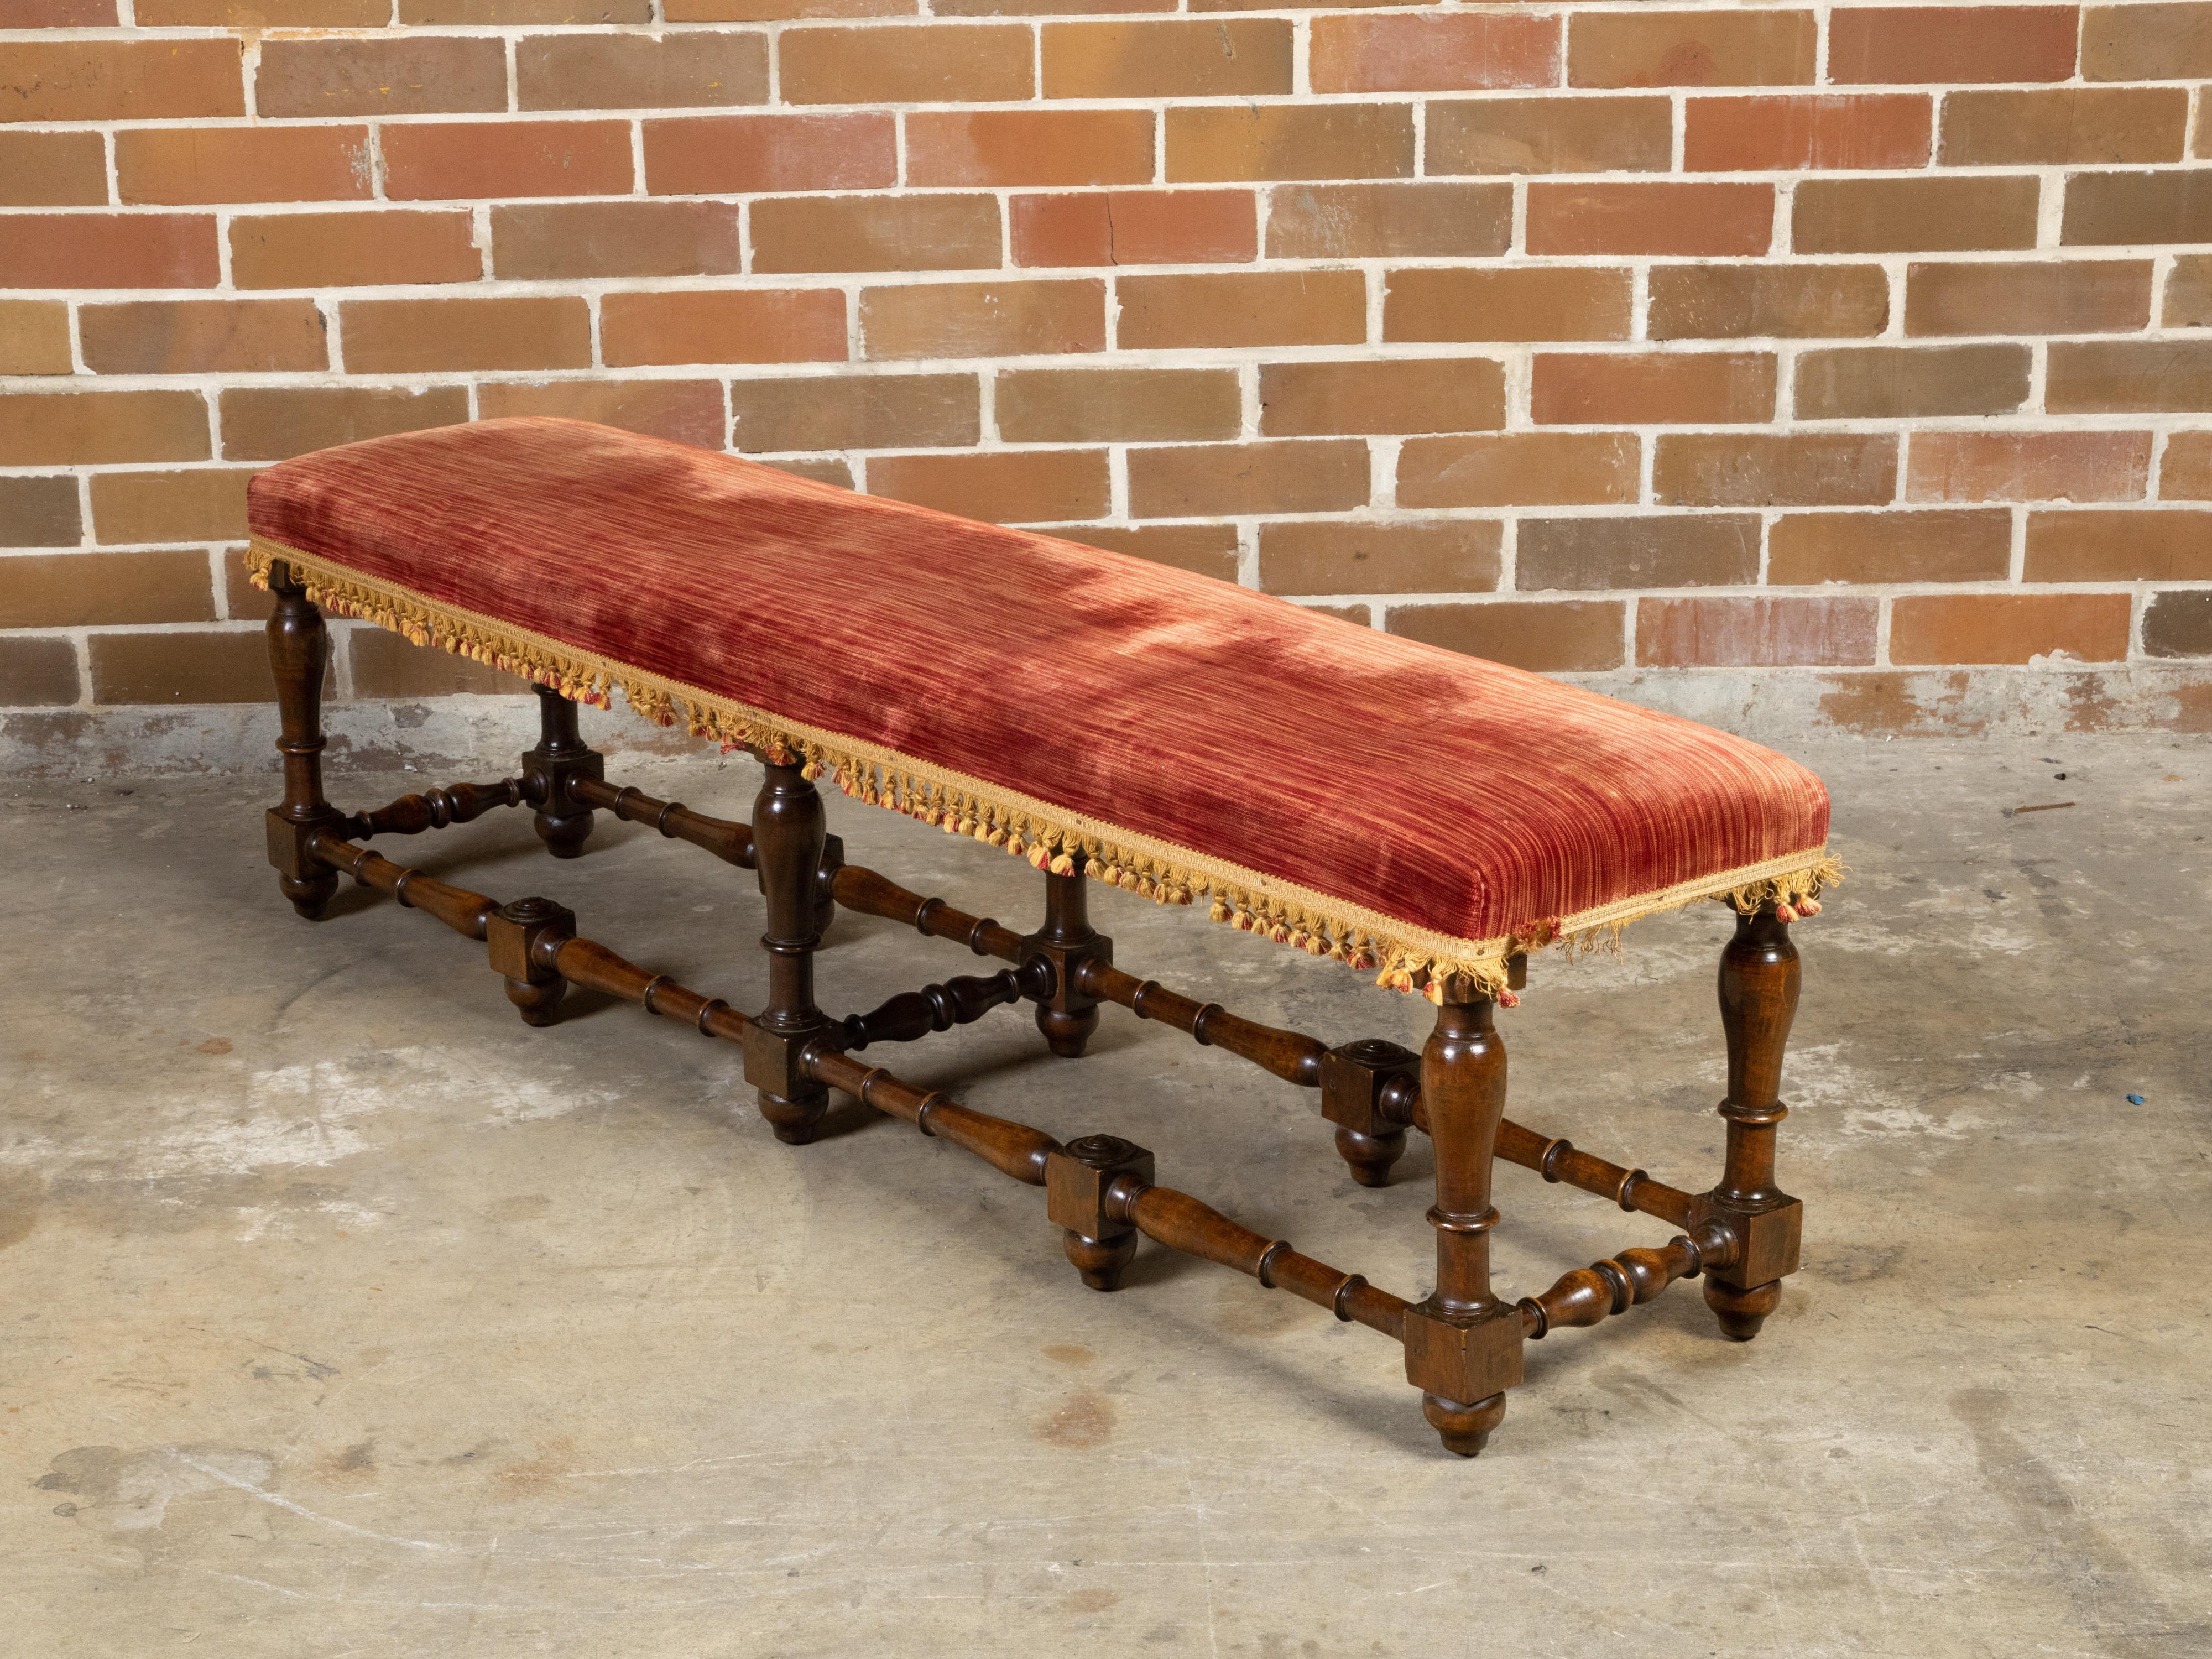 Italian 1820s Walnut Bench with Red Fabric, Turned Legs and Stretchers For Sale 2